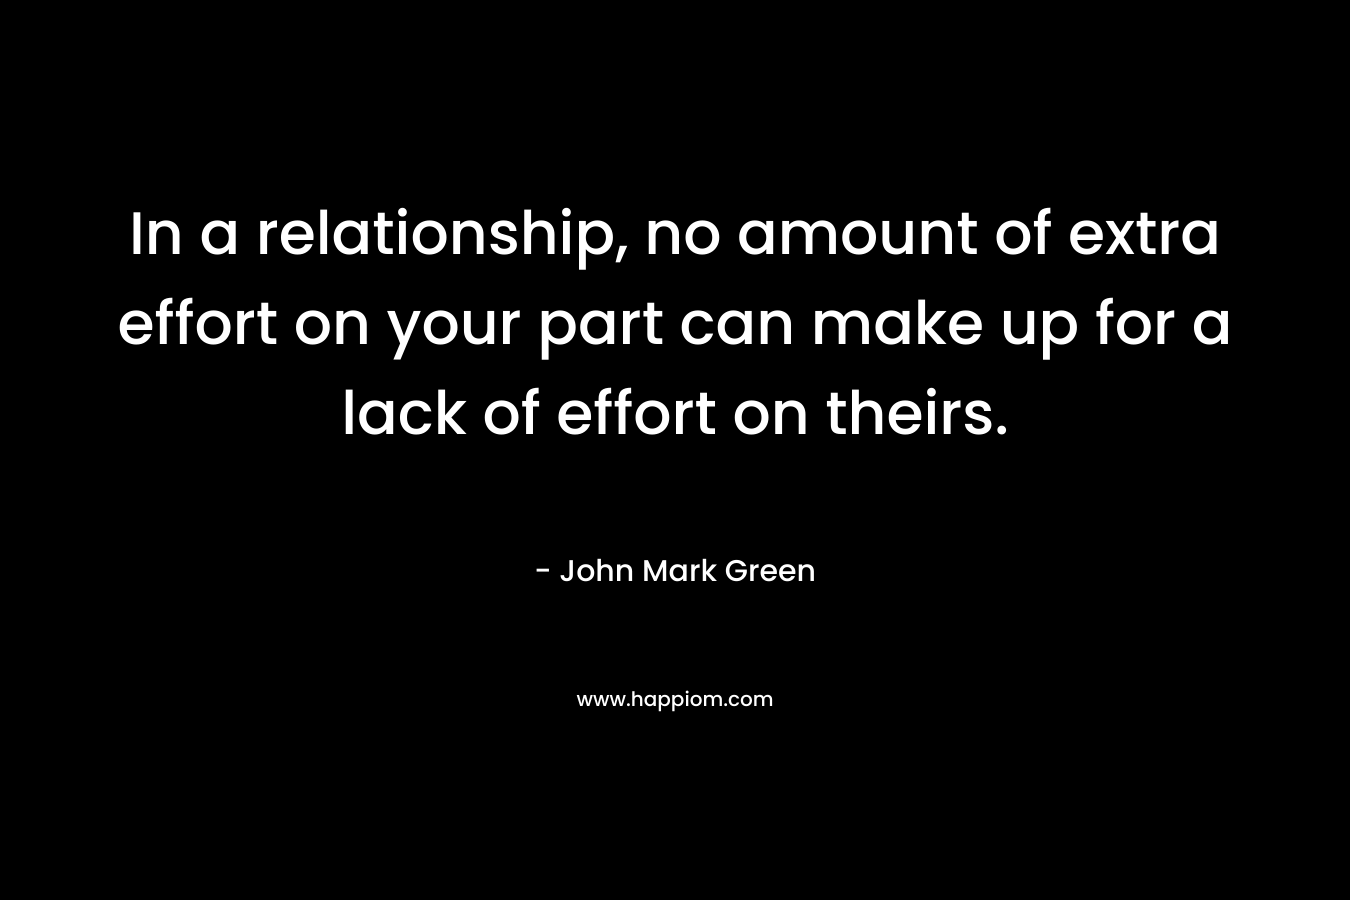 In a relationship, no amount of extra effort on your part can make up for a lack of effort on theirs.